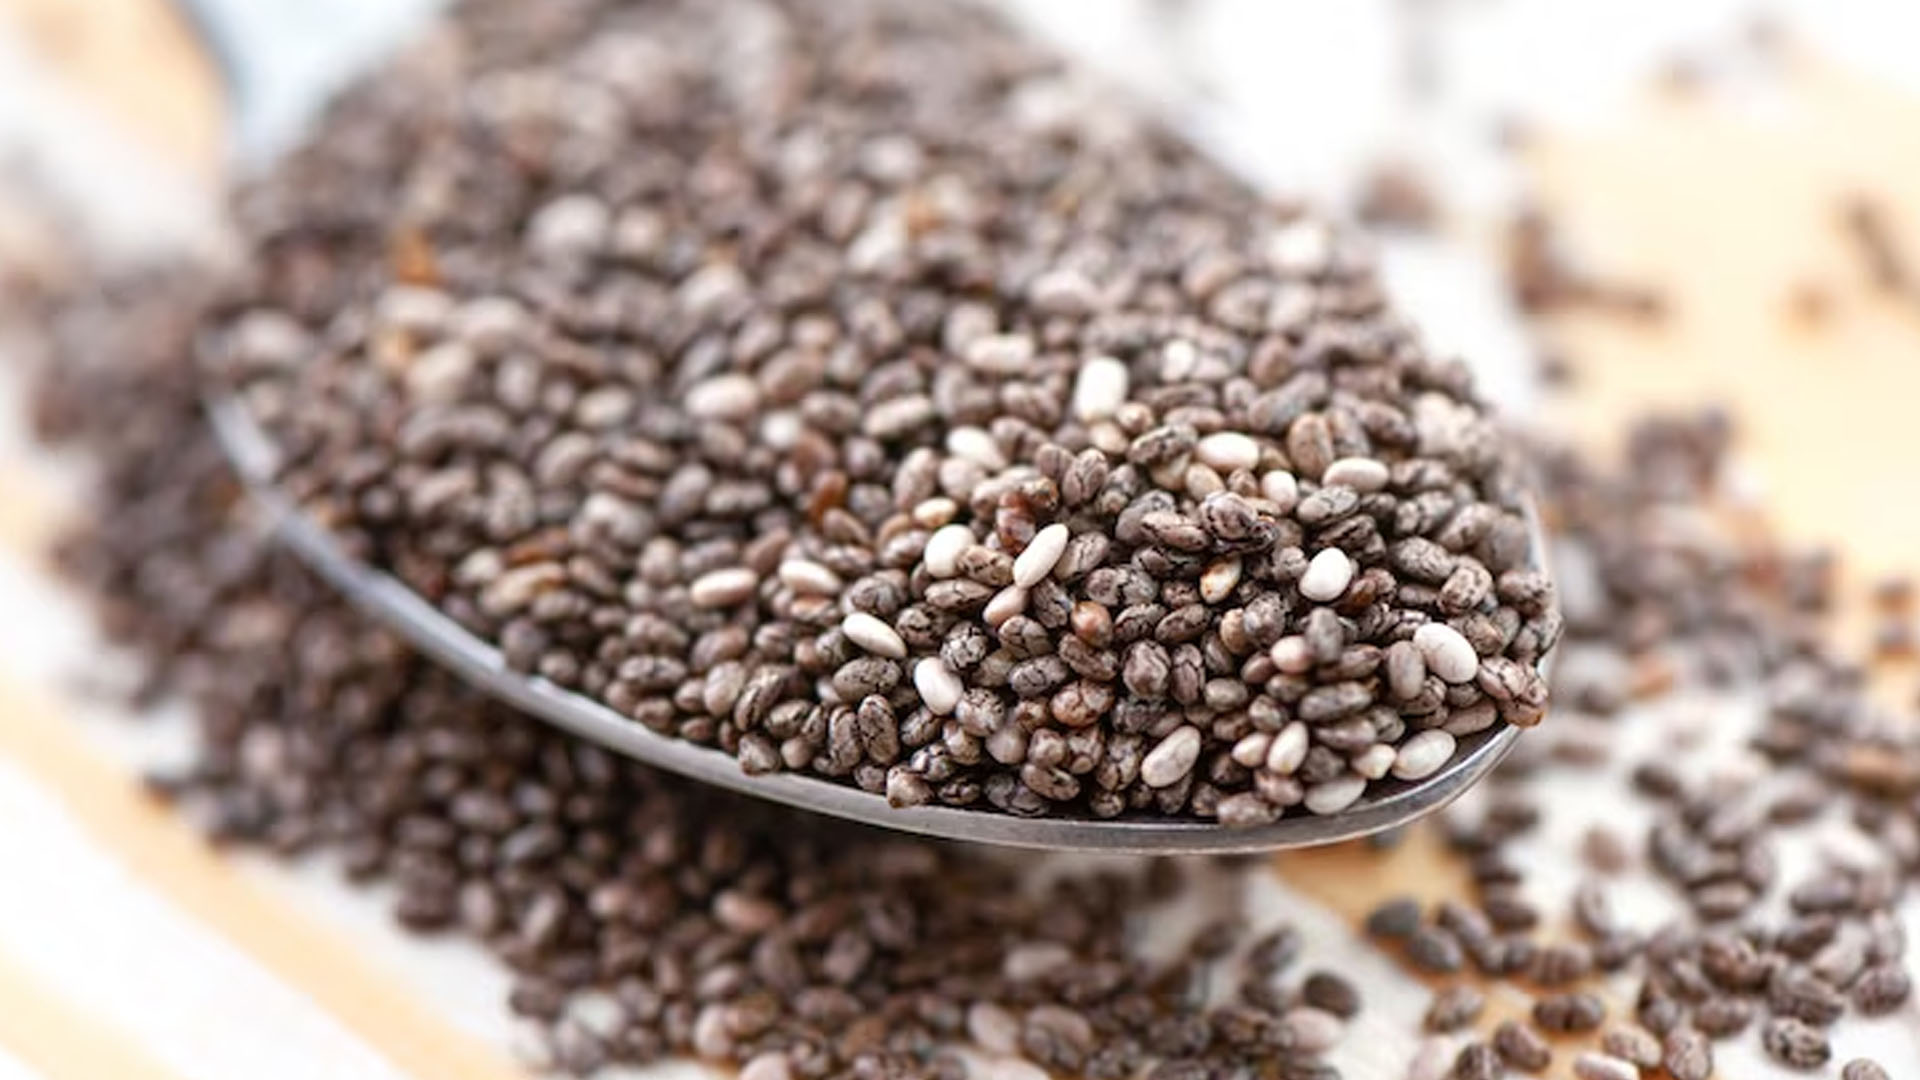 What Are The Health Benefits of Consuming Chia Seeds?